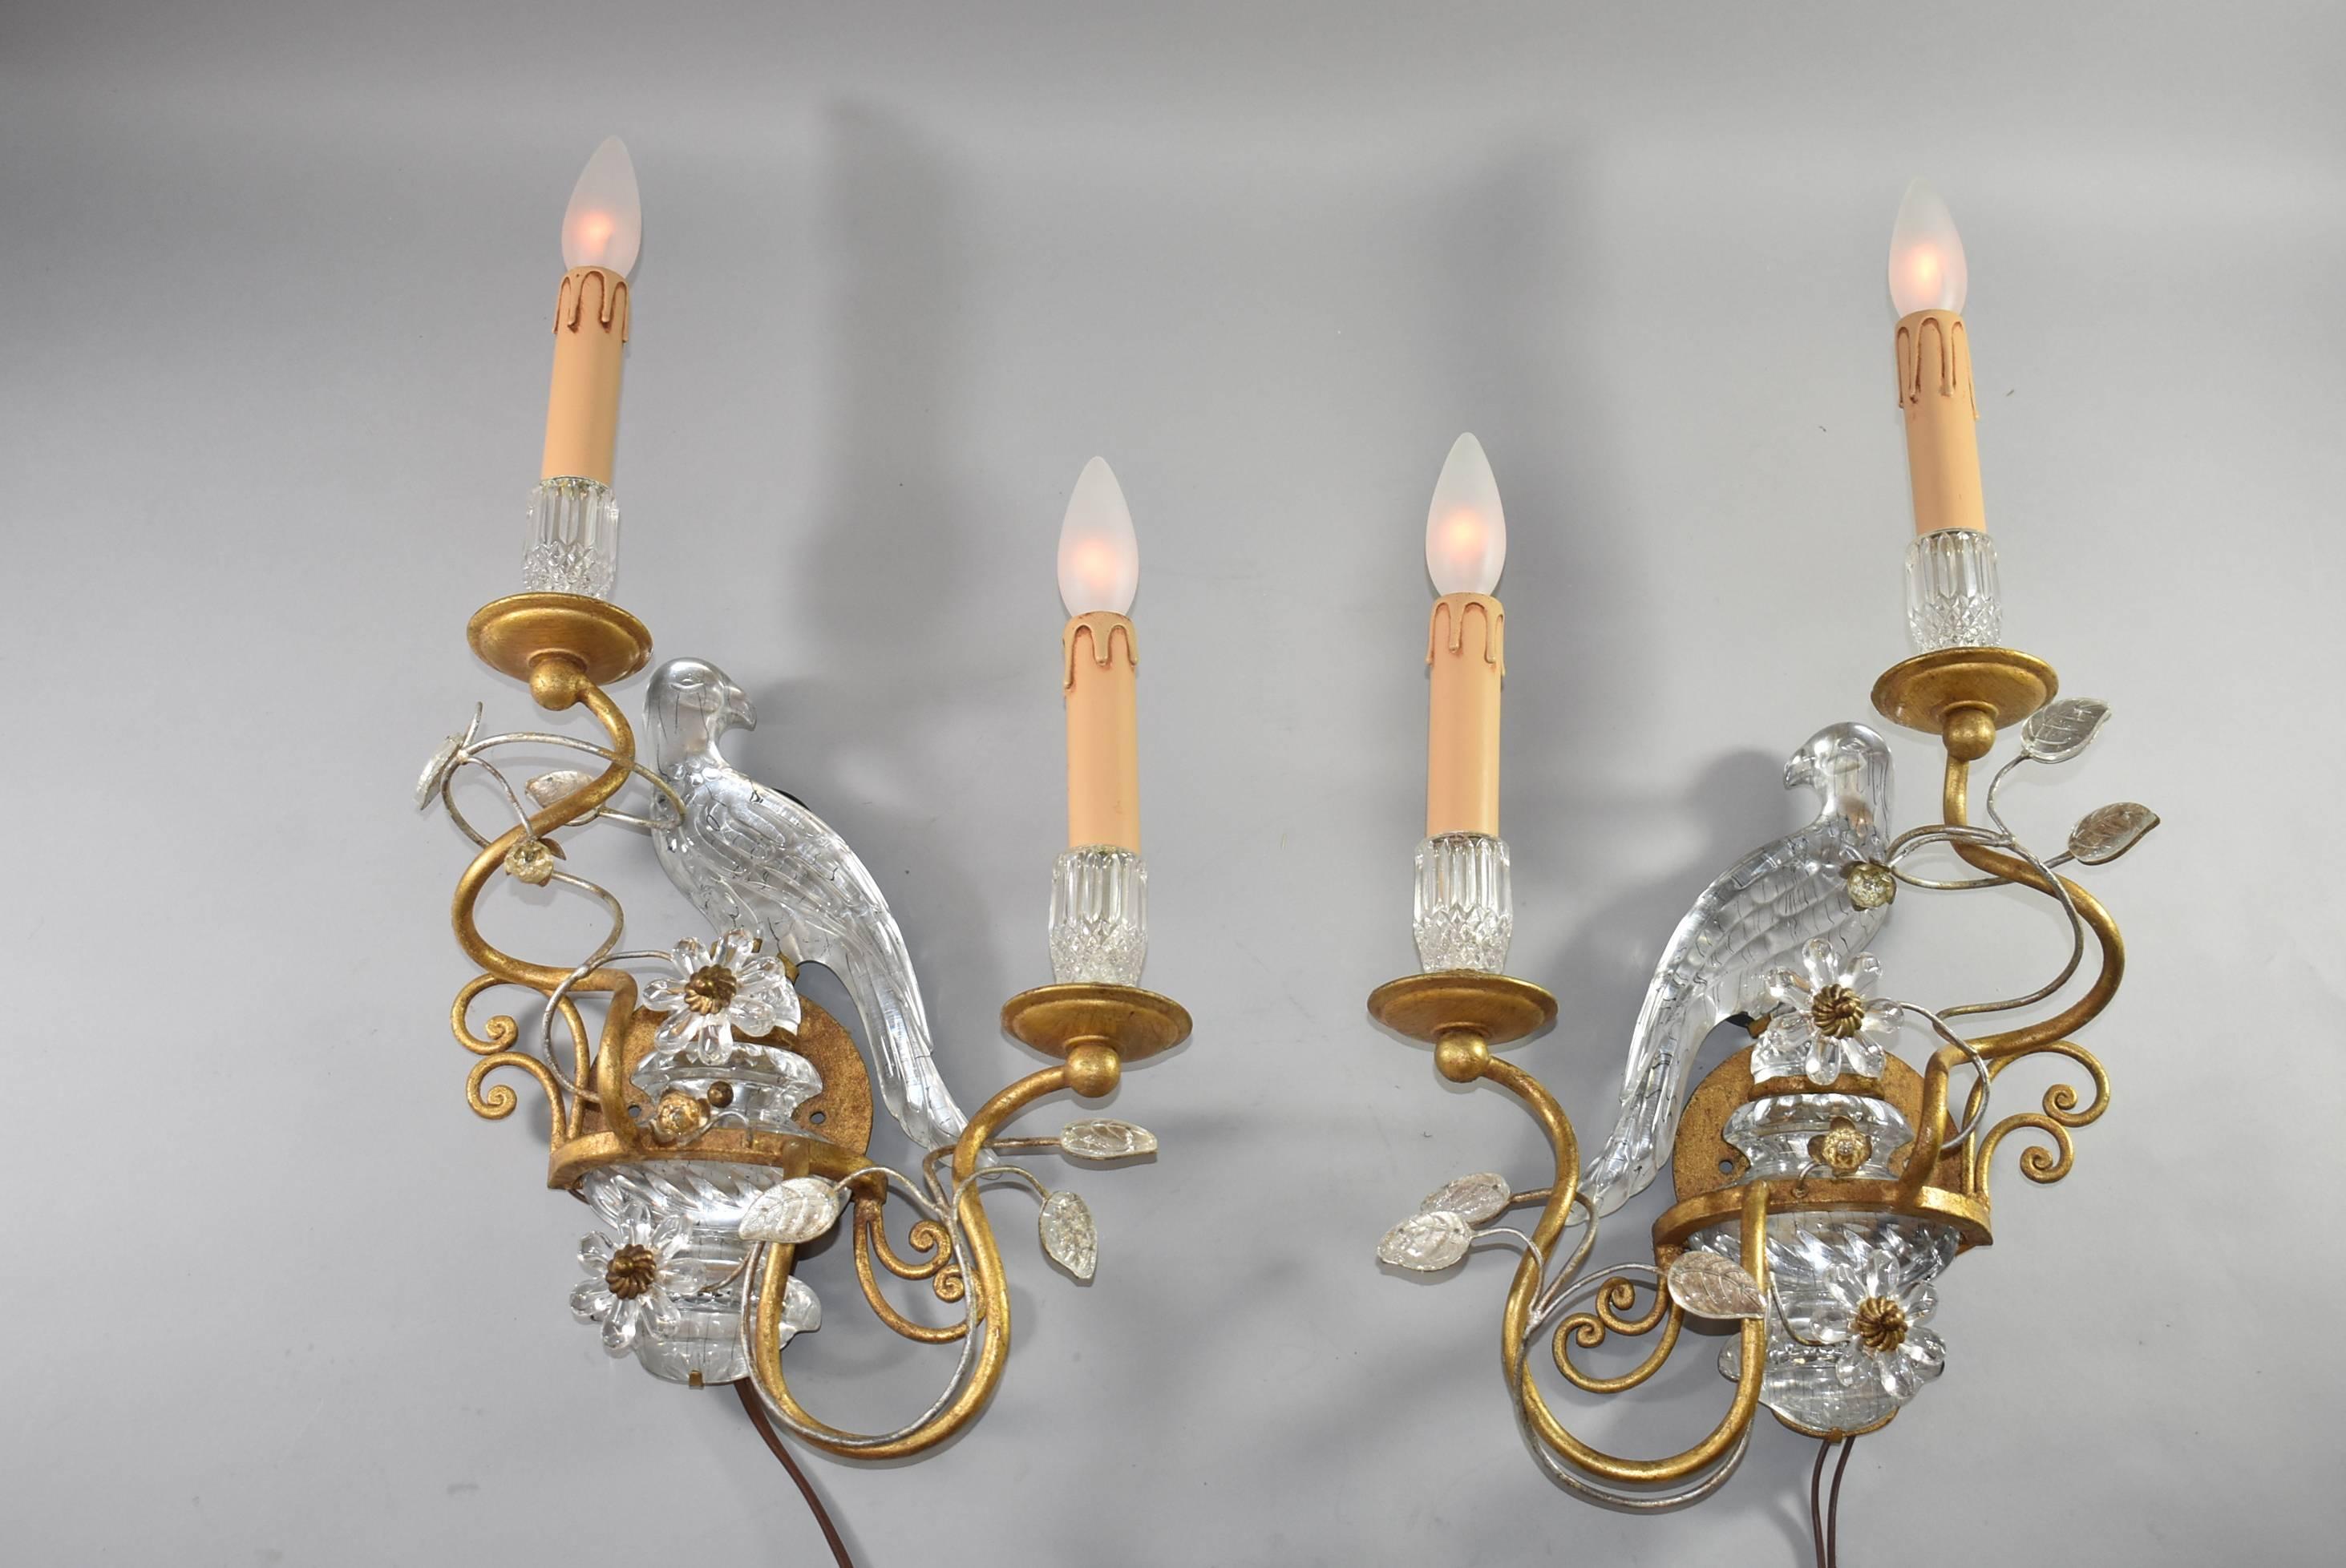 A stunning pair of antique wall sconces in the style of Maison Bagues of France. Each sconce is beautifully balanced with crystal leaves and a crystal urn with a stylized glass parrot perched upon it. Fluted crystal bobeches set off the crystal